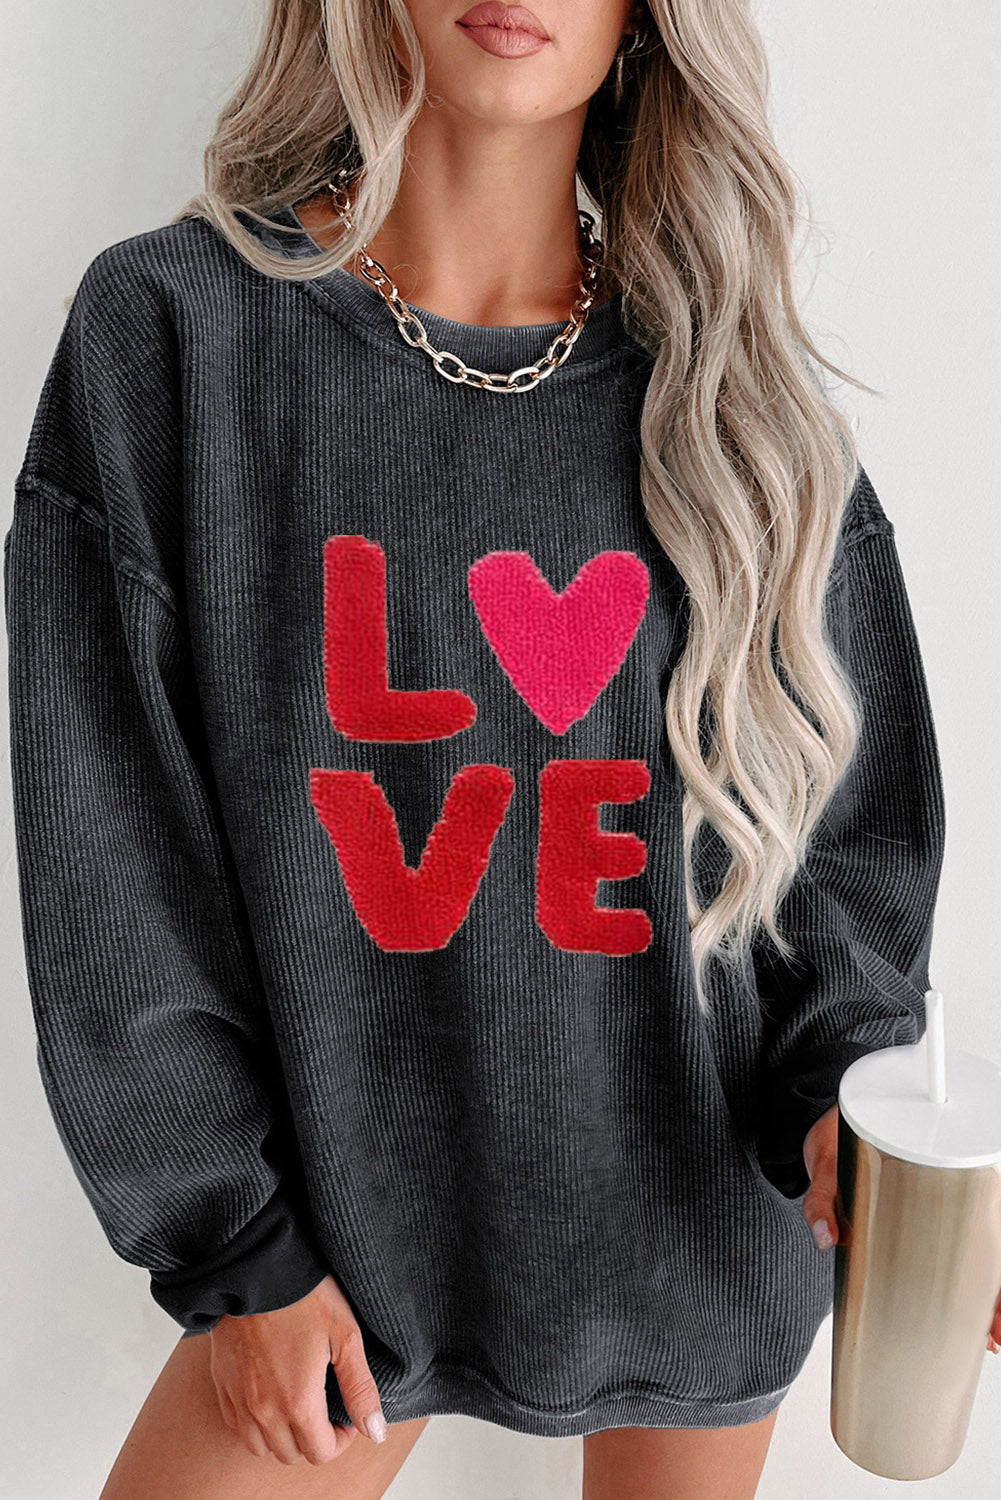 LC25316911-2-S, LC25316911-2-M, LC25316911-2-L, LC25316911-2-XL, LC25316911-2-2XL, Black Love Sweatshirt Women Valentine's Day Embroidered Long Sleeve Corded Tops